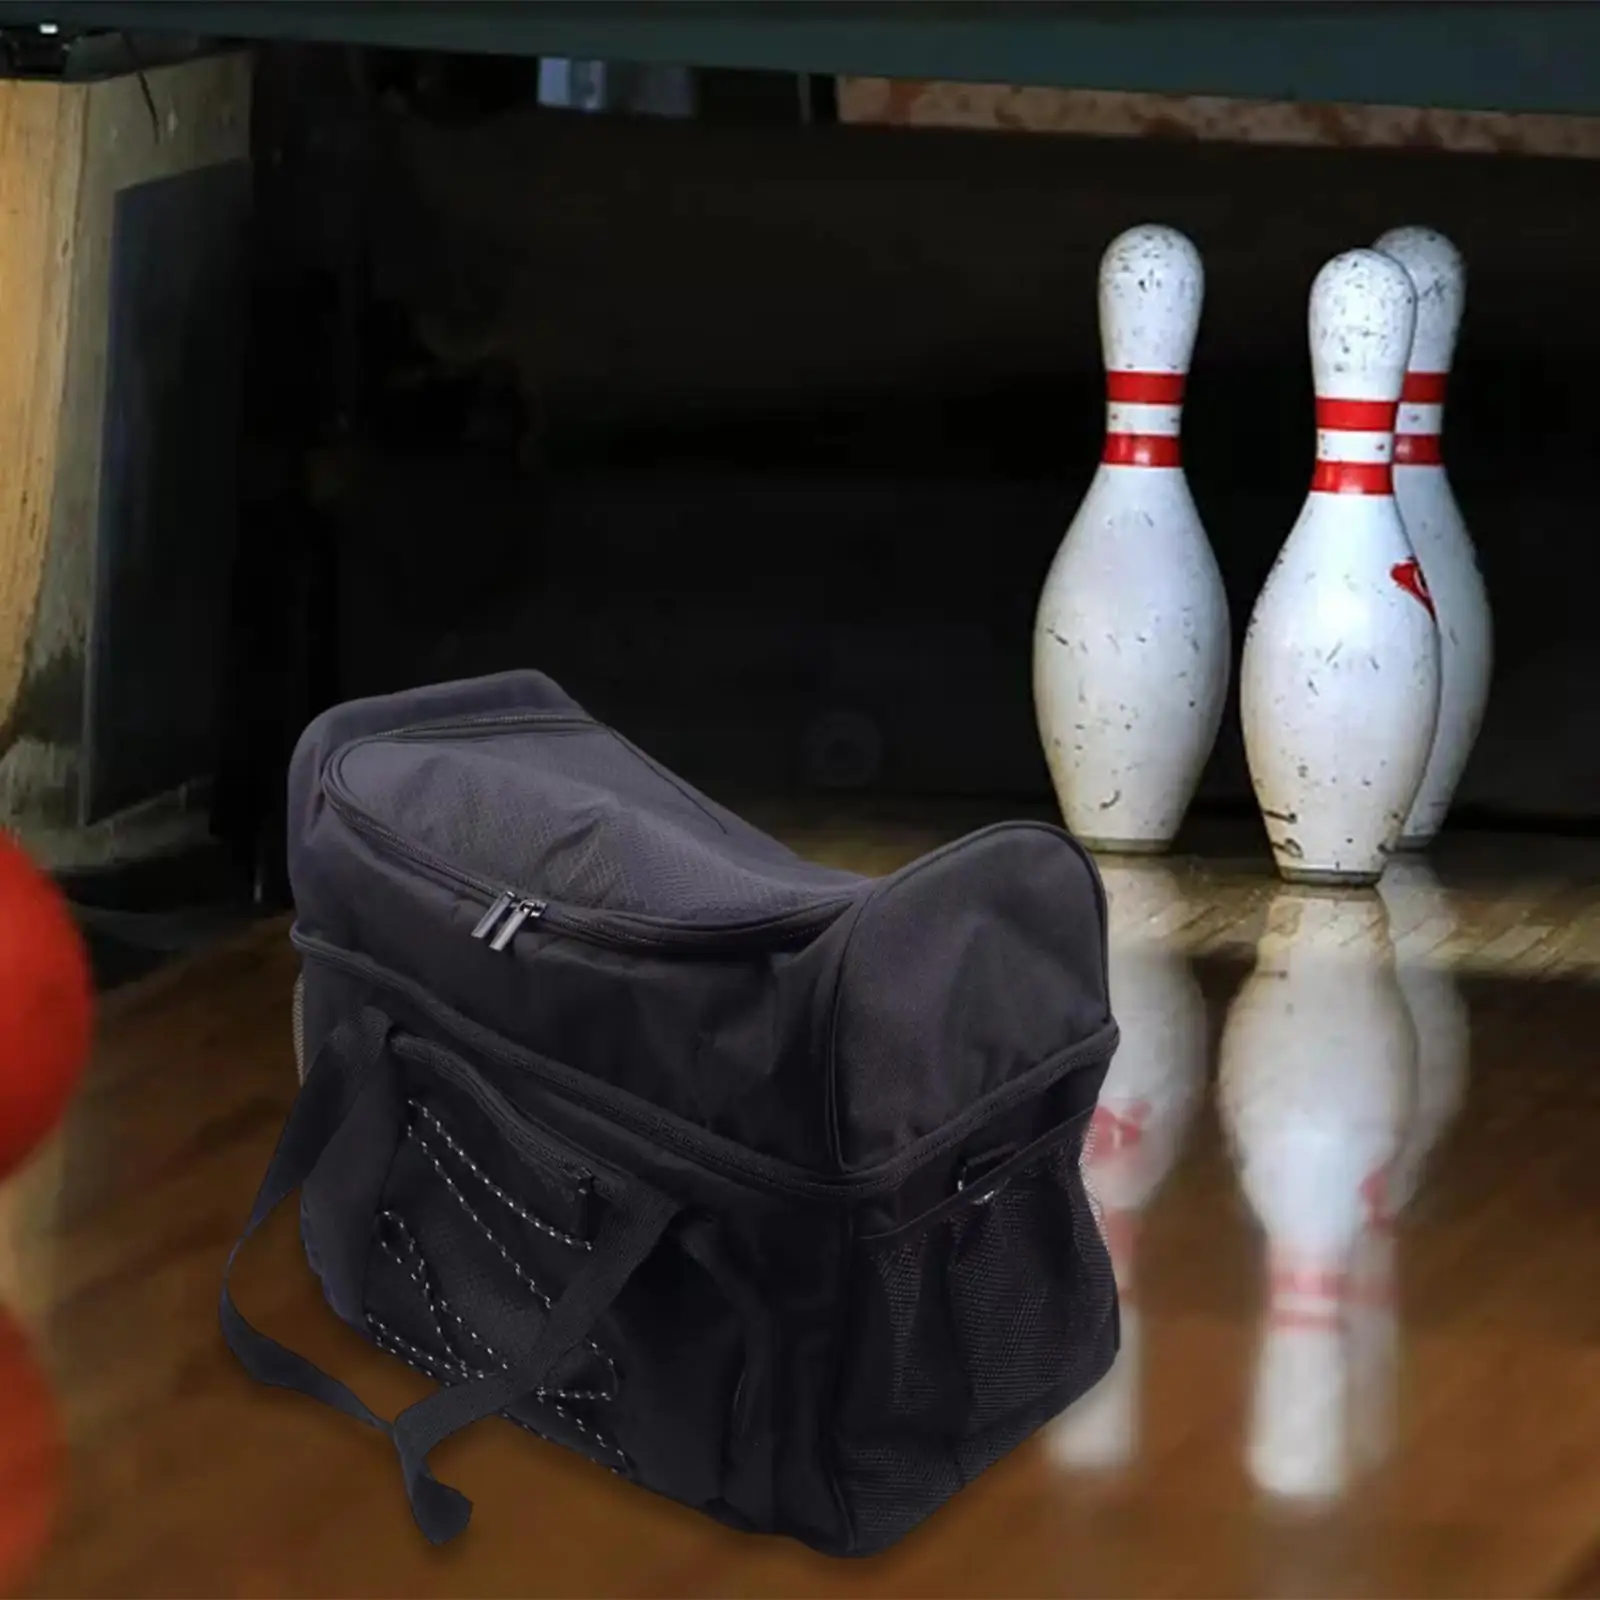 Bowling Bag for Double Balls Nylon Protective with Padded Divider Handbag Bowling Ball Tote Holds Single Pair of Bowling Shoes